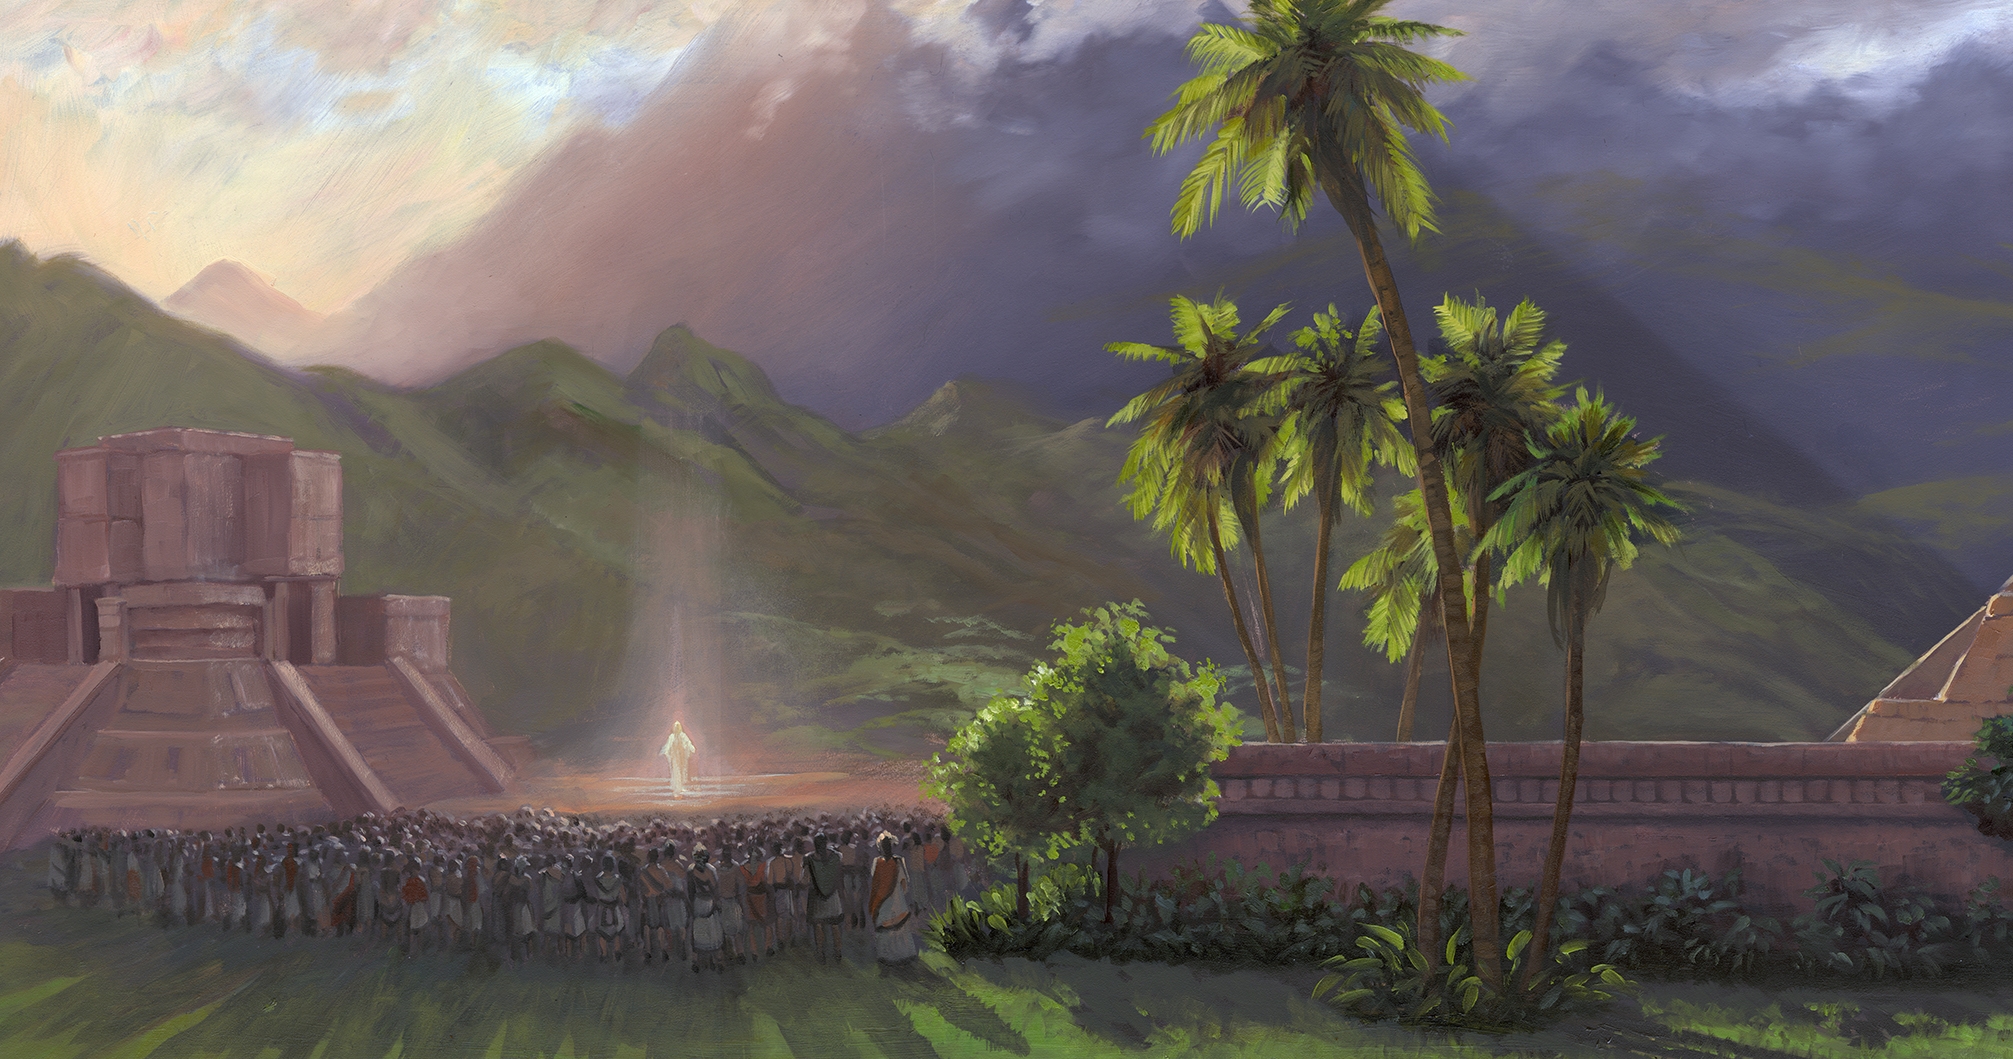 Illustration of Christ visiting the Nephites in America, with stone temple, mountains, and palm trees, titled "I Am the Light of the World," by James Fullmer.